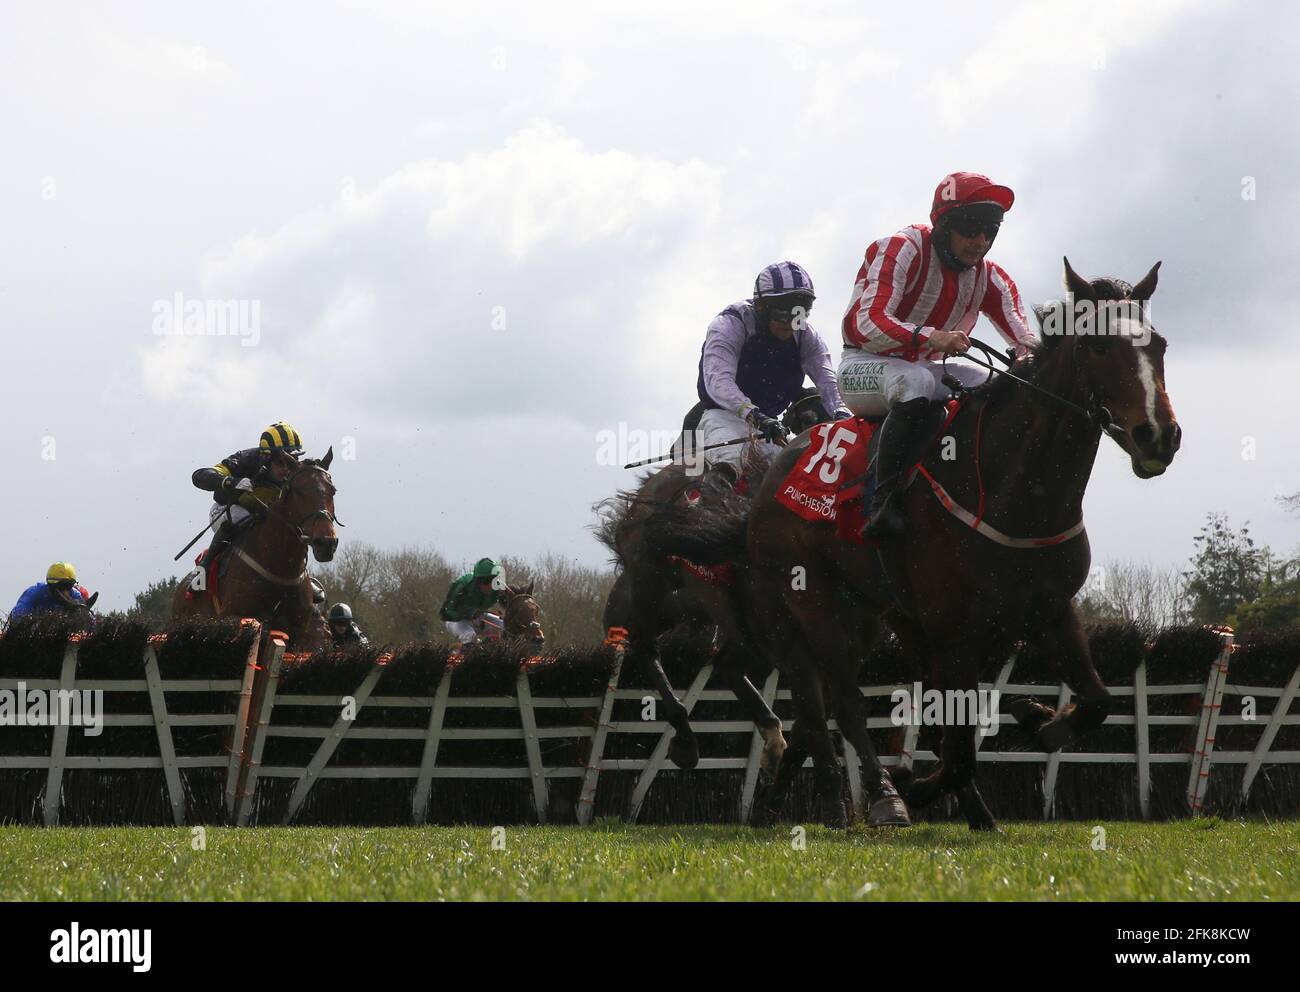 Cathal Landers riding Jiving Jerry (right) on their way to winning the Specialist Joinery Group Handicap Hurdle during Day Three of the Punchestown Festival at Punchestown Racecourse in County Kildare, Ireland. Issue date: Thursday April 29, 2021. Stock Photo